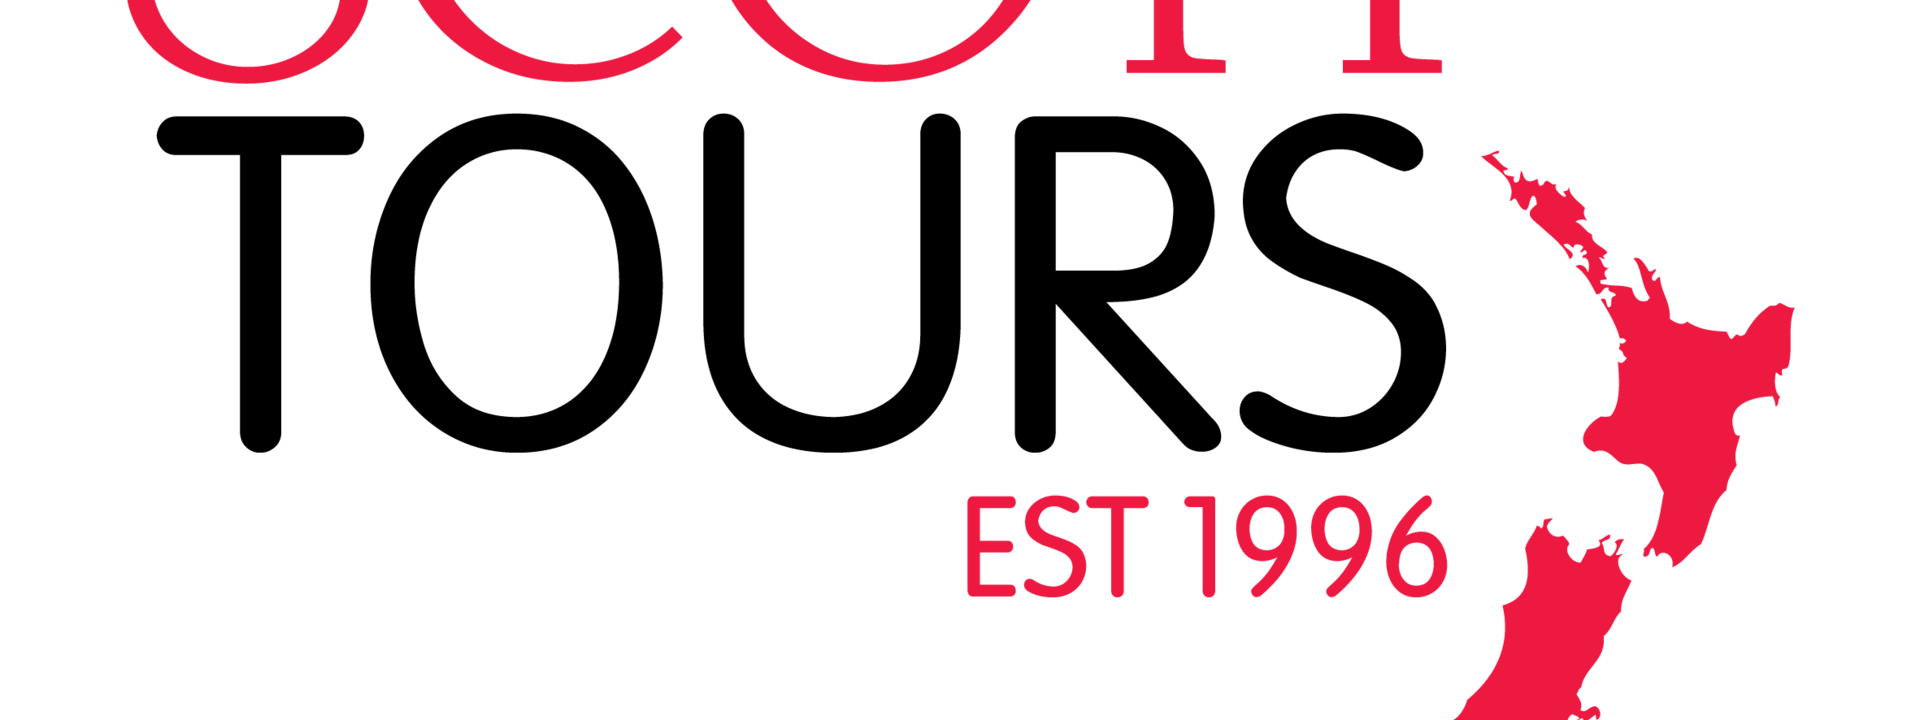 Scott Tours Logo - Red Text_0.png